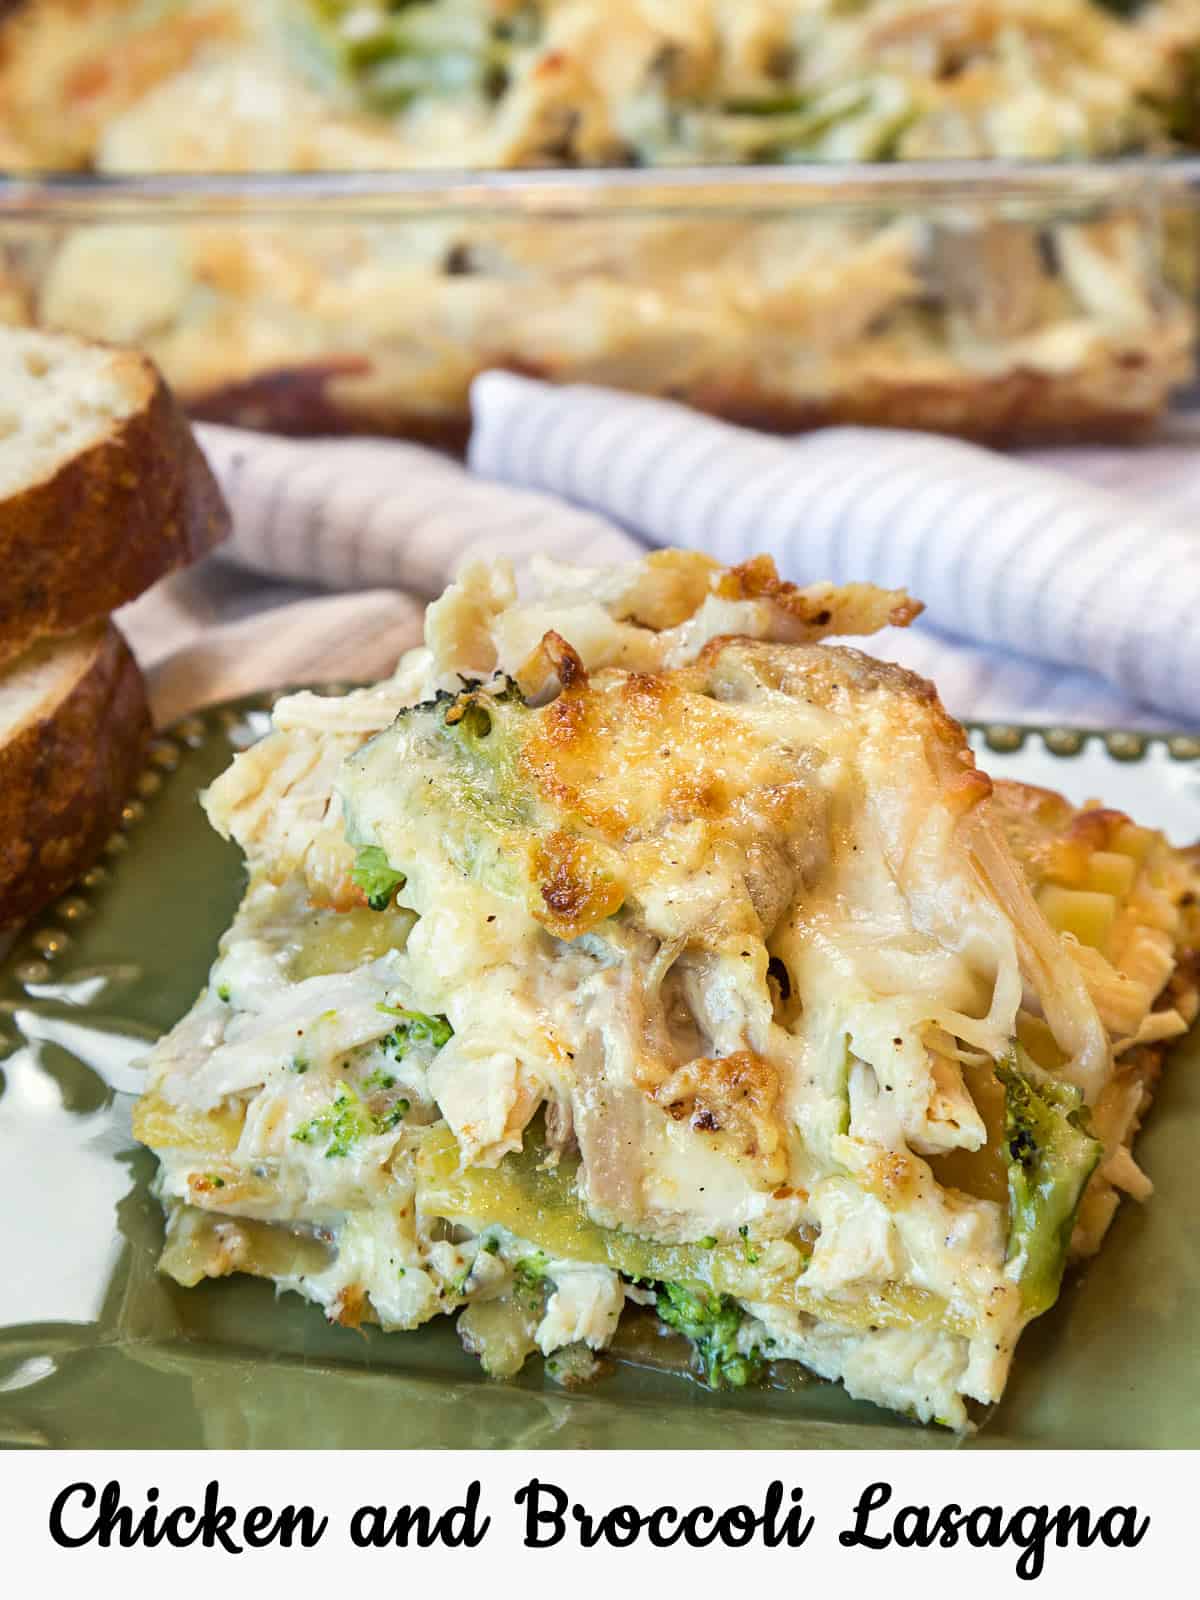 A close-up photo of a slice of chicken and broccoli lasagna that is ready to serve on a plate.